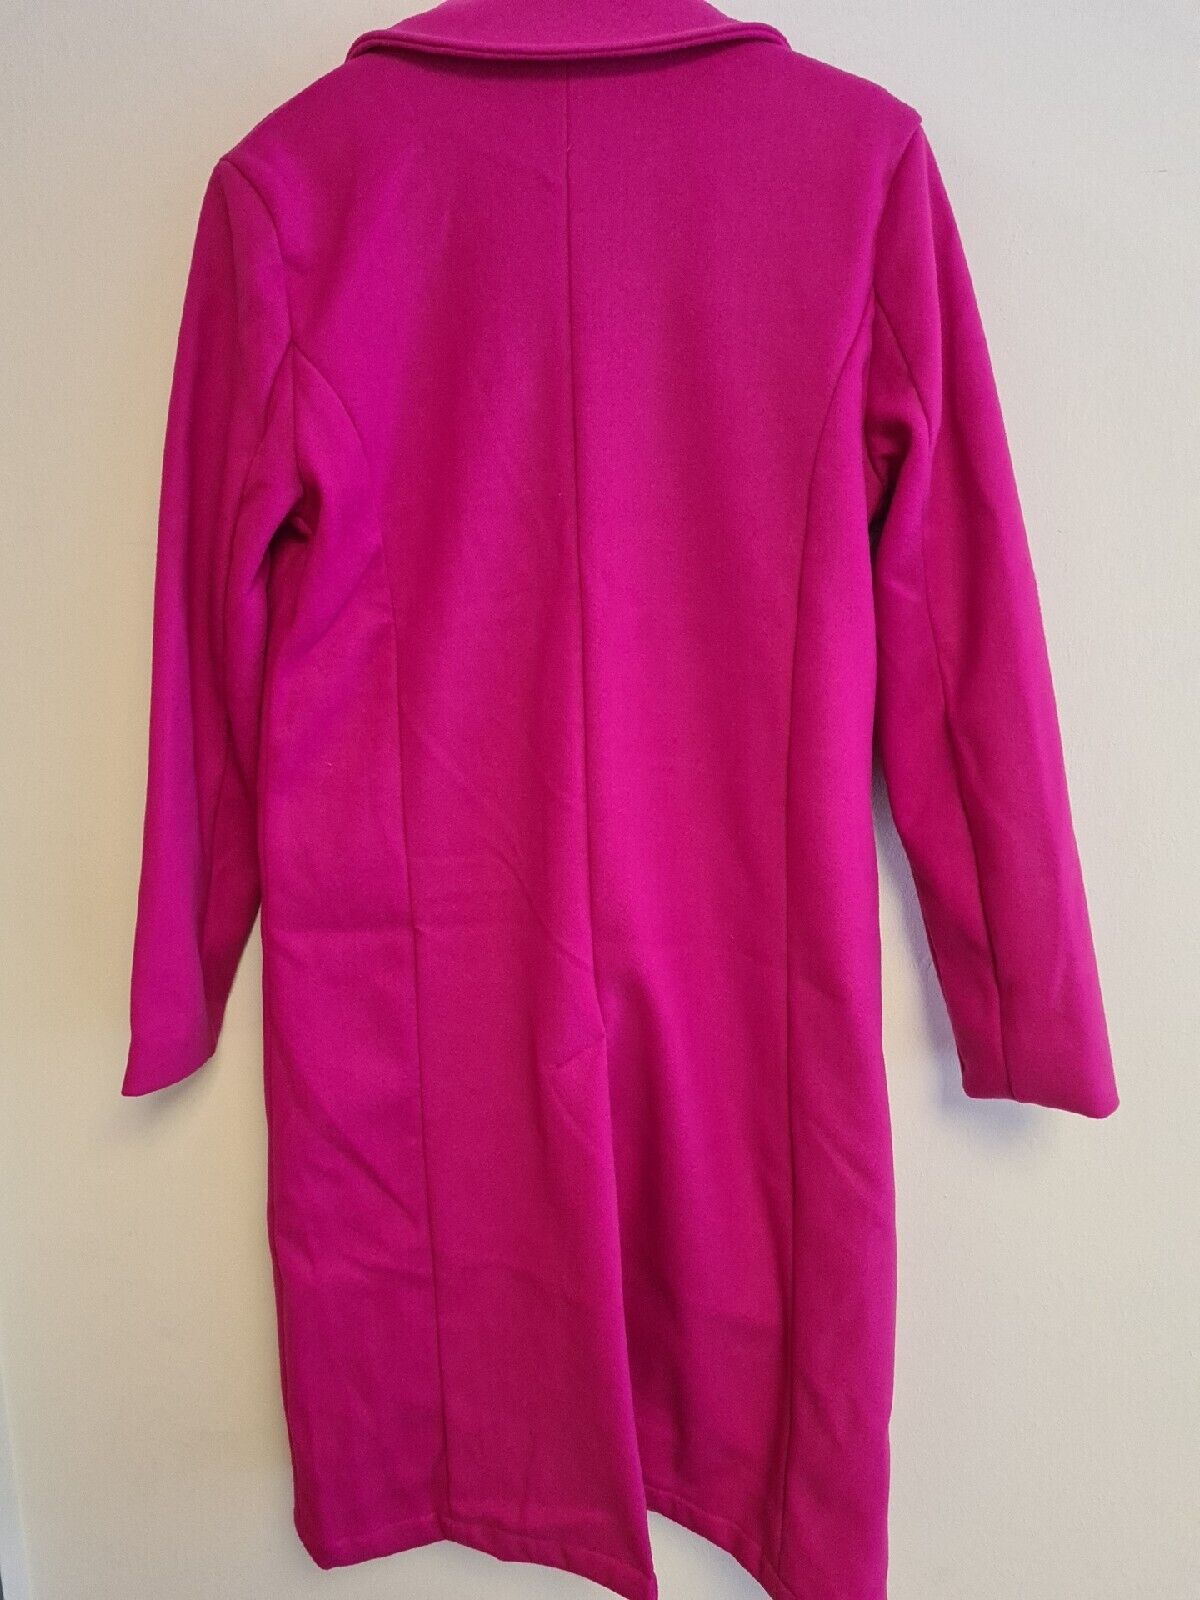 Brave Soul Double Breasted Coat Pink Size 10 BNWT ref****V28